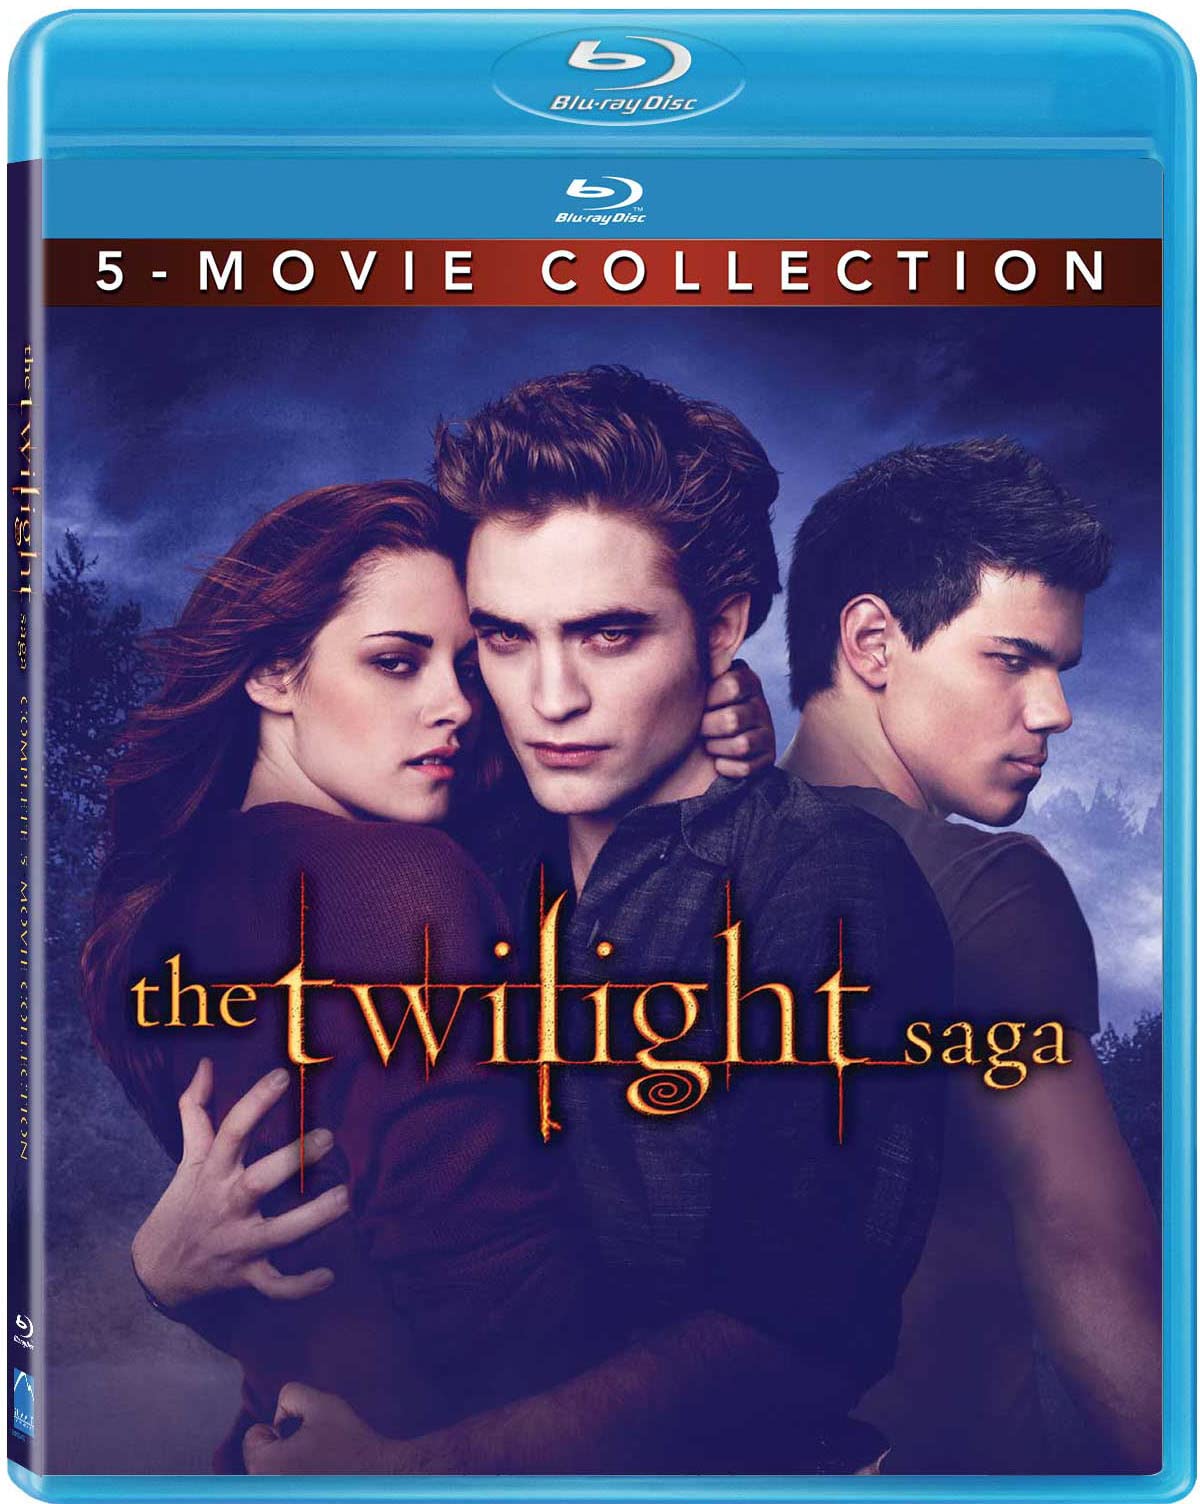 The Twilight Saga: 5-Movie Collection (Blu-ray) $8.74 + Free Shipping w/ Prime or on $35+